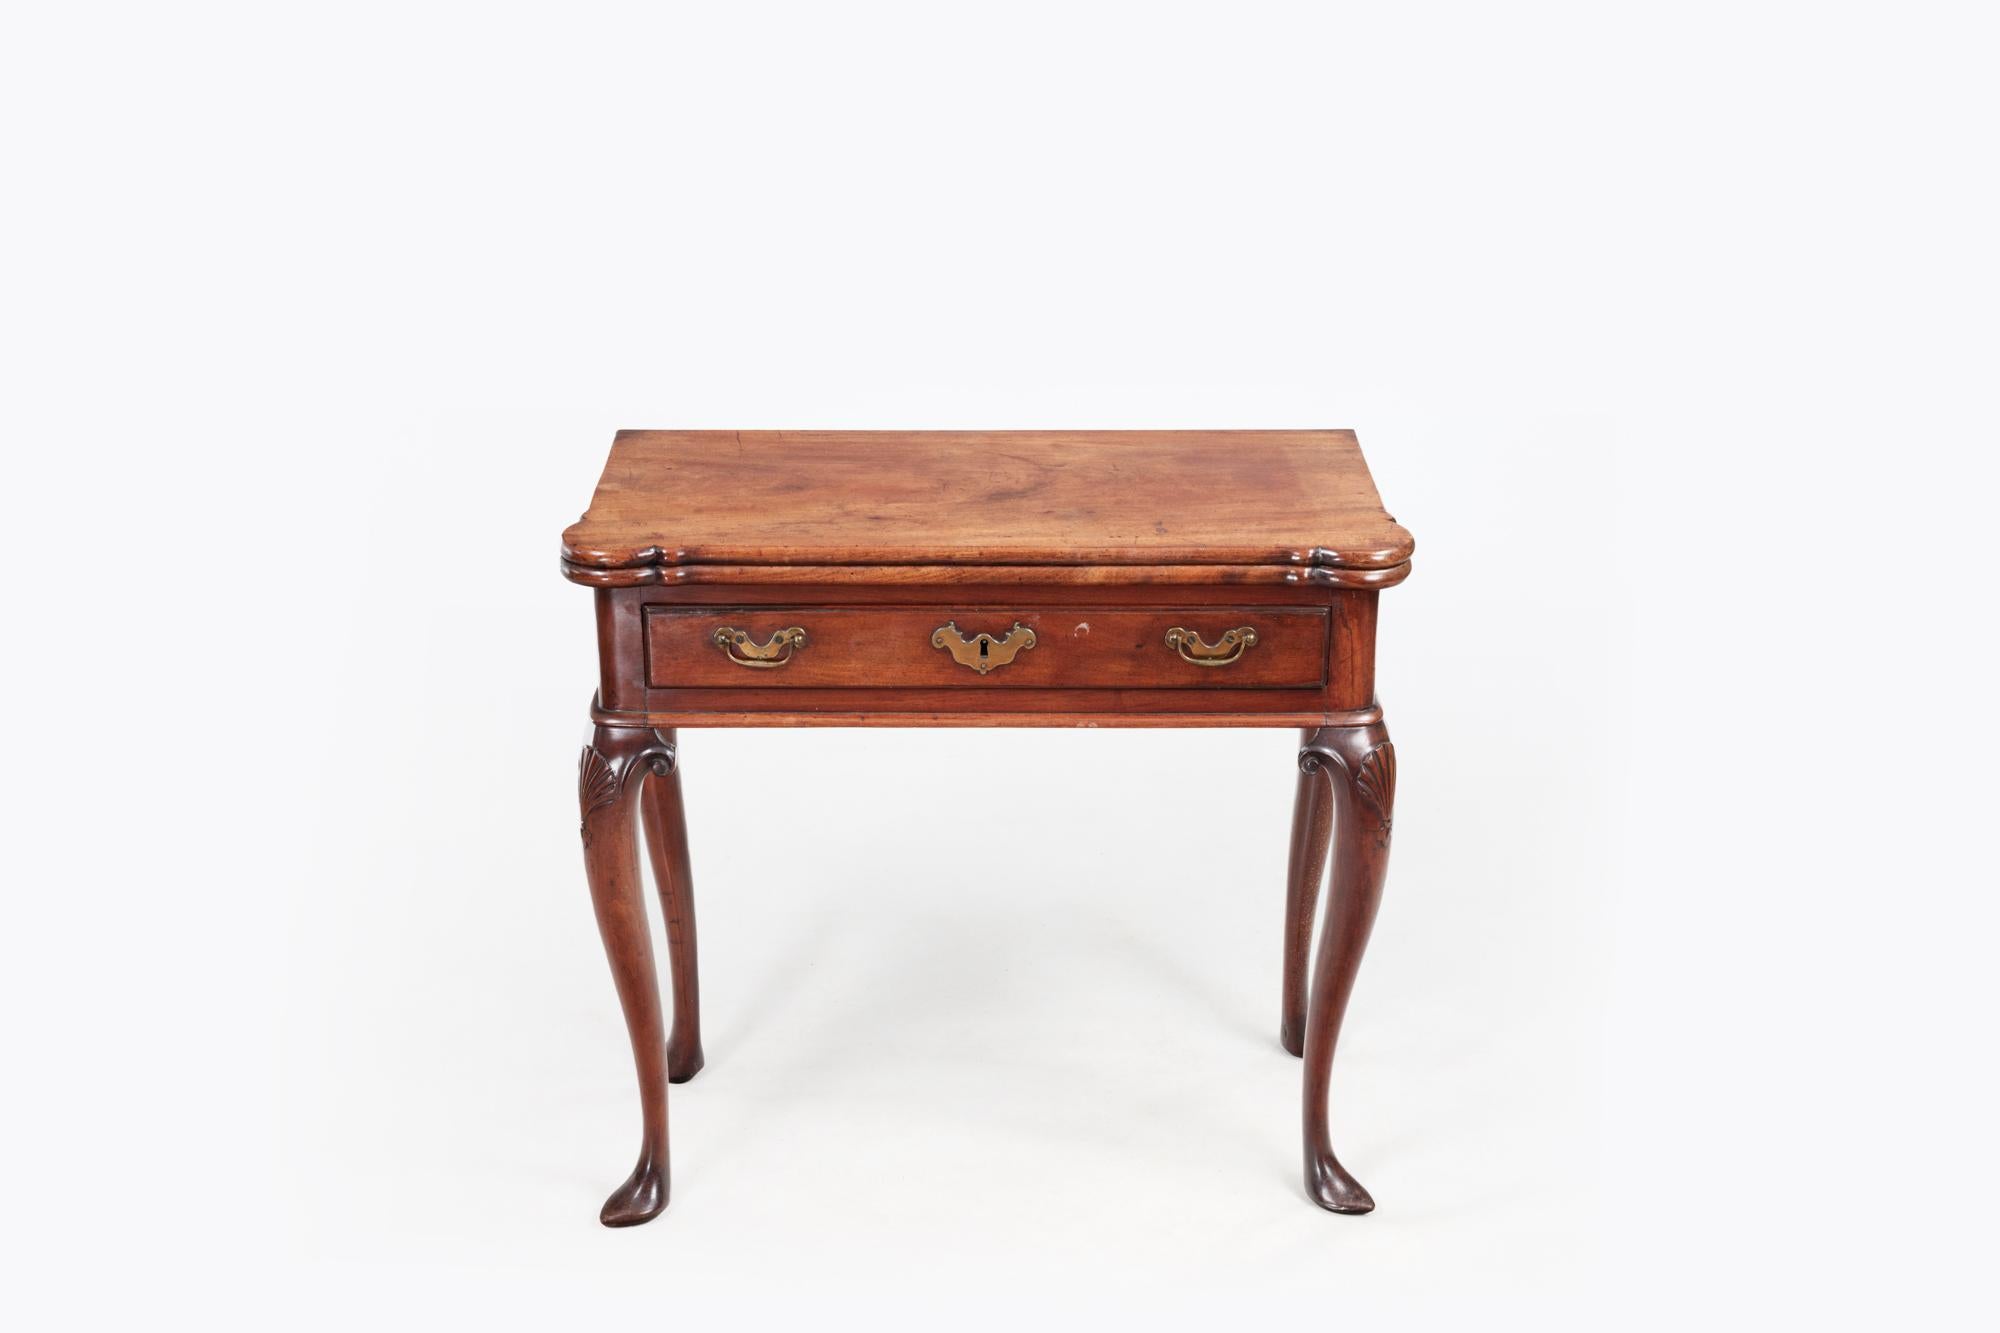 18th Century mahogany fold-over tea table with shaped top. Unusual for this type of piece, it sits on four matching cabriole legs with scallop and scroll decoration to the knees and terminates on slipper feet. The single drawer to the front is